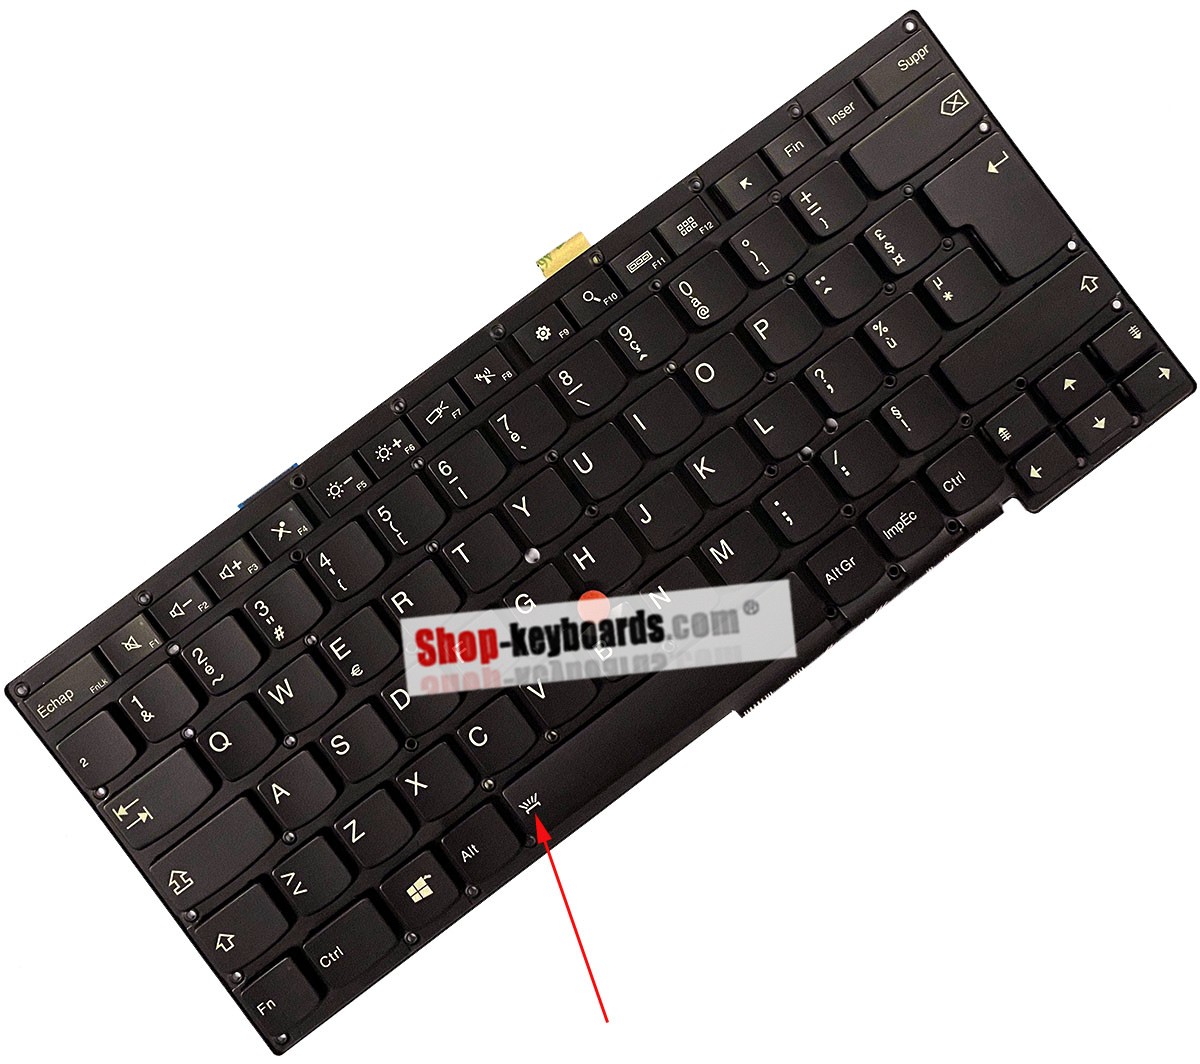 Lenovo ThinkPad S440 Keyboard replacement